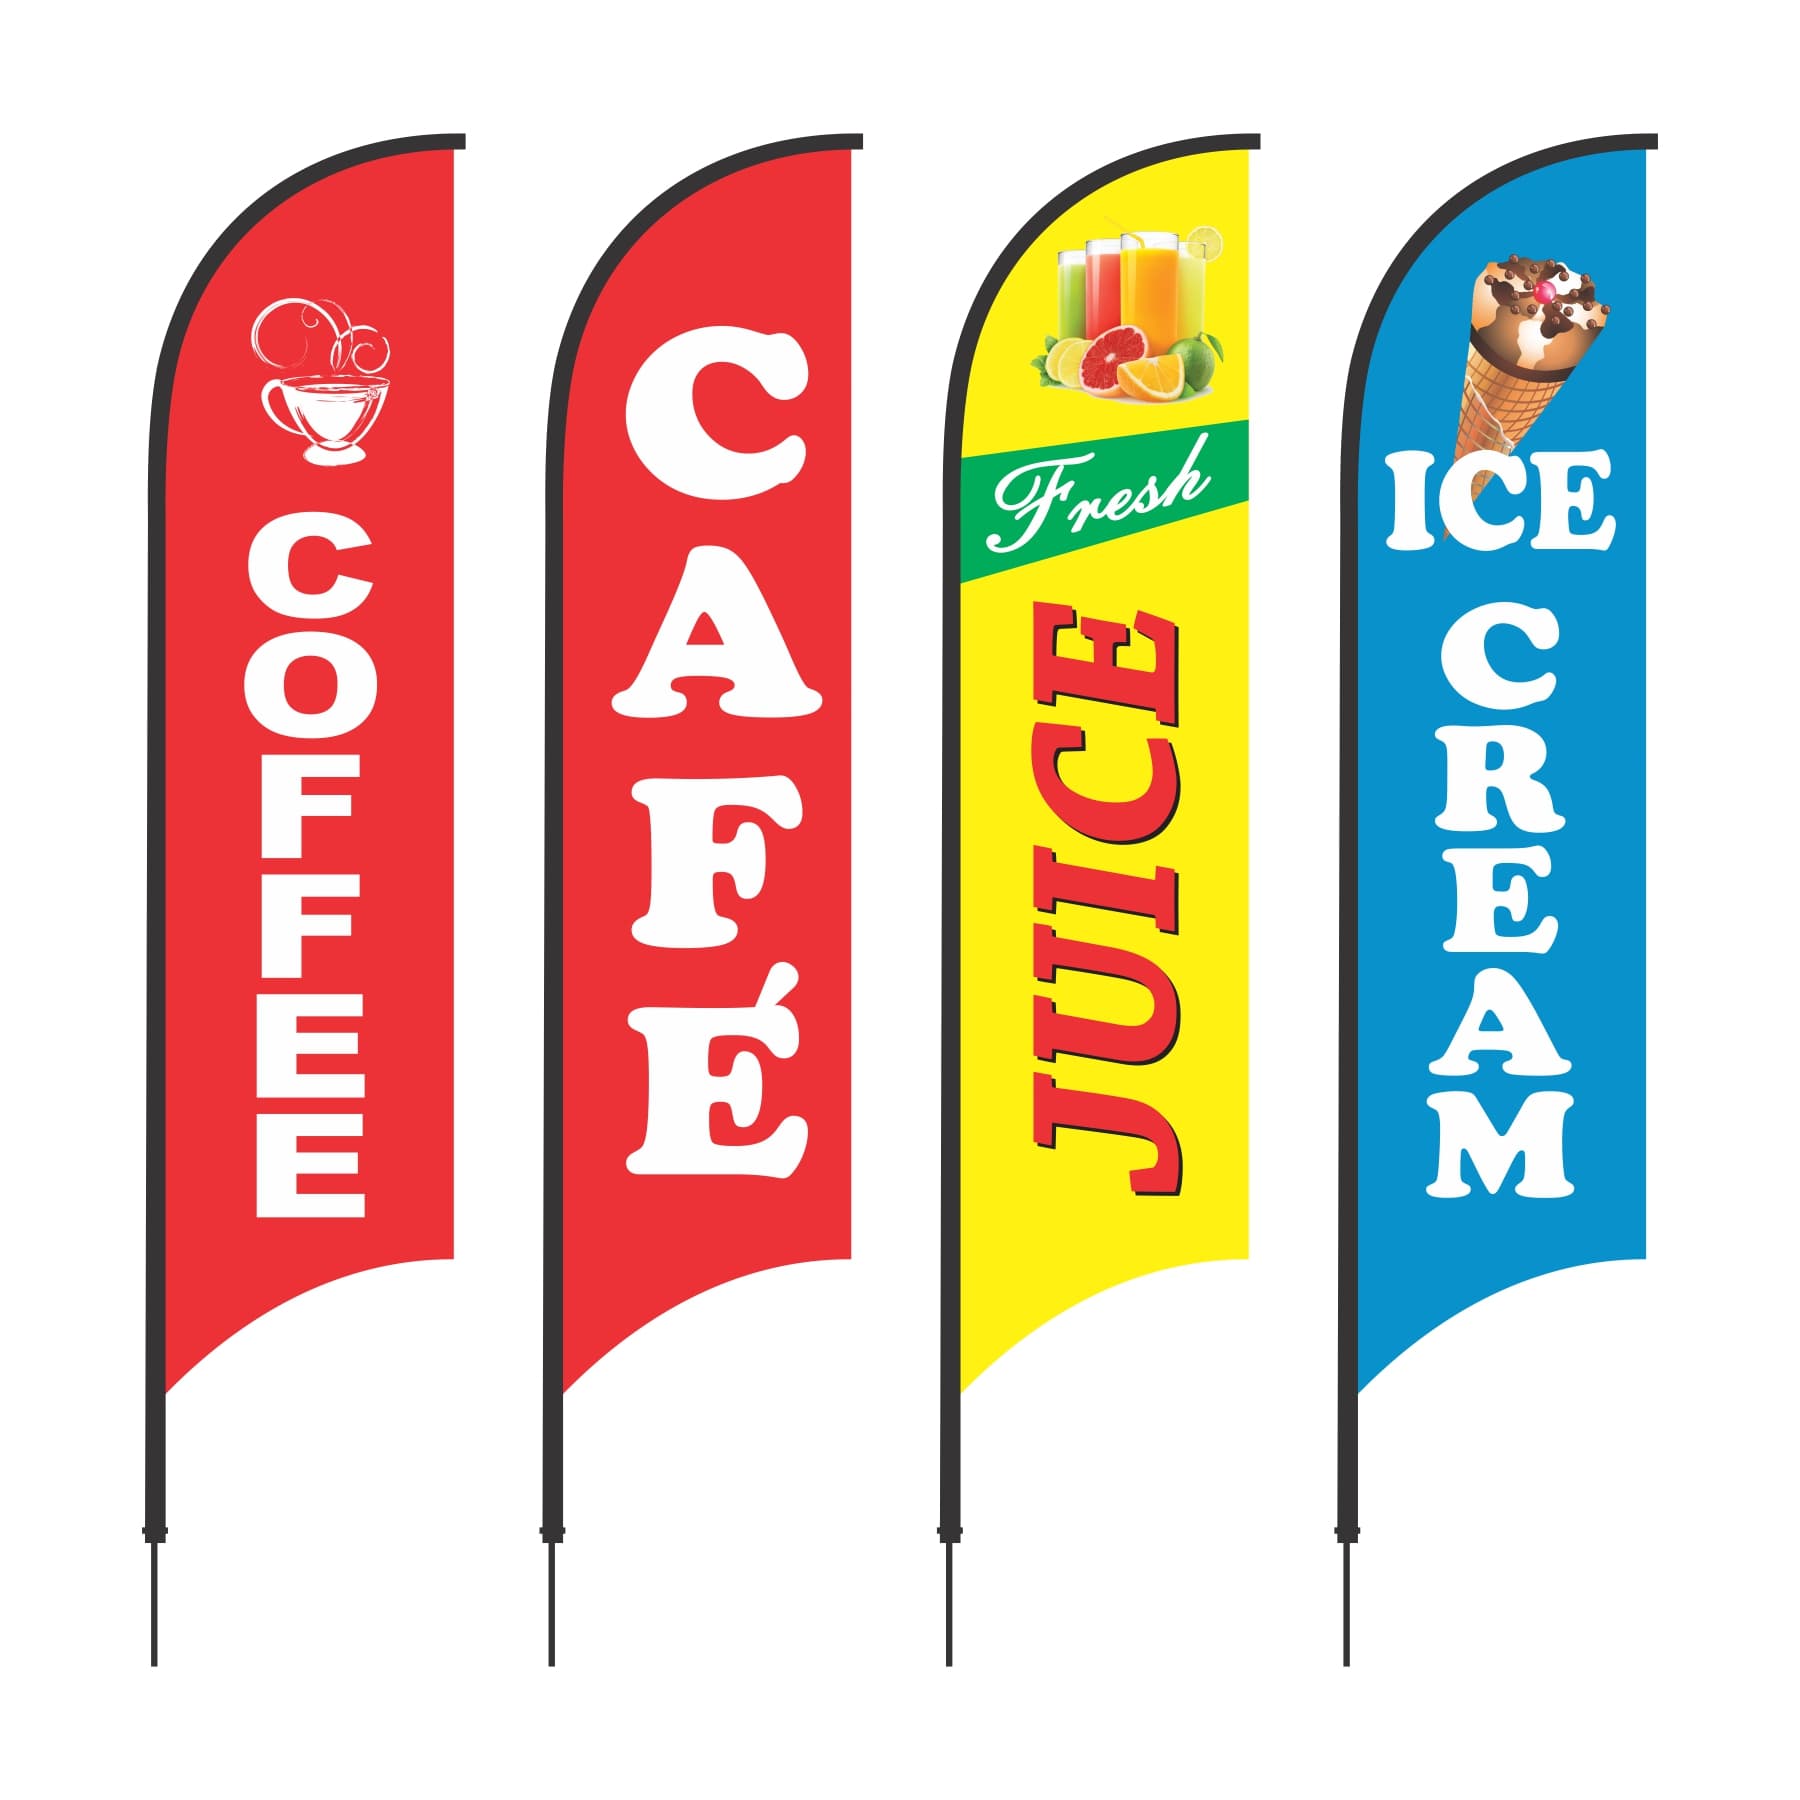 Coffee cafe flags for restaurant